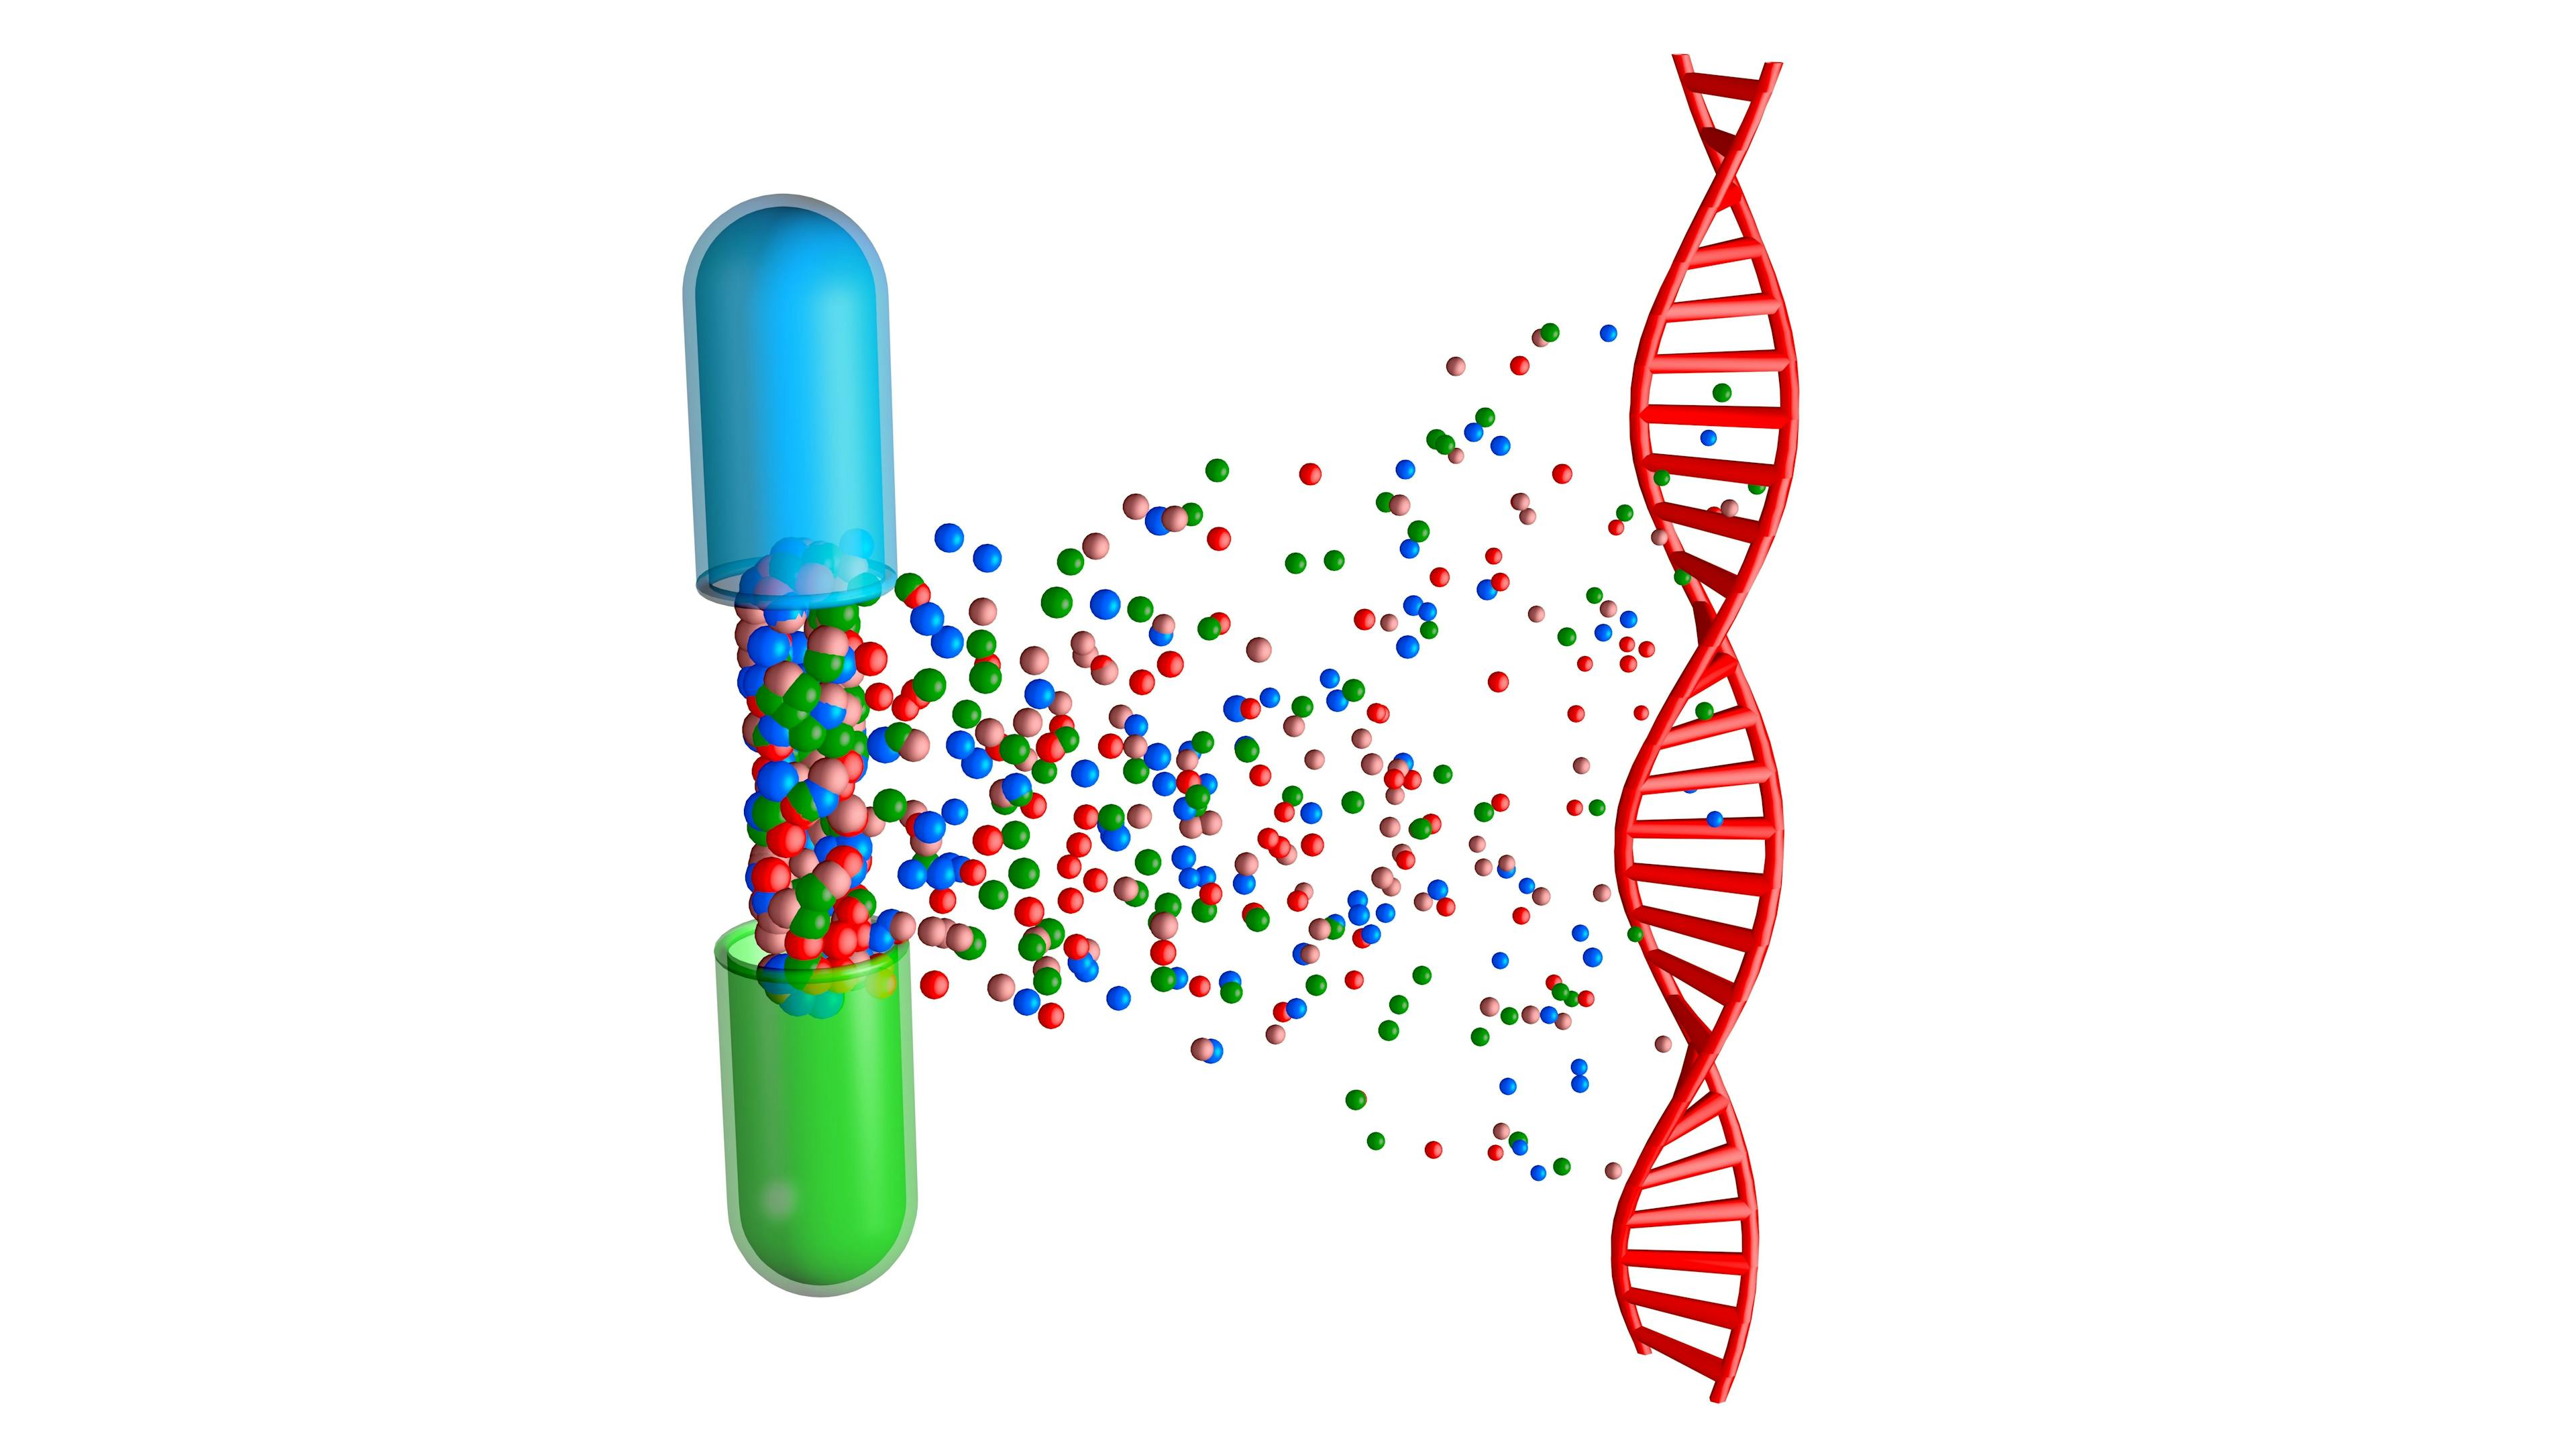 Pill capsule opens and releases drugs to DNA strand. Medication interacting with double-helix. Pharmacogenomics , Pharmacogenetics themes. 3d rendering illustration. Credit: vrx123 - stock.adobe.com